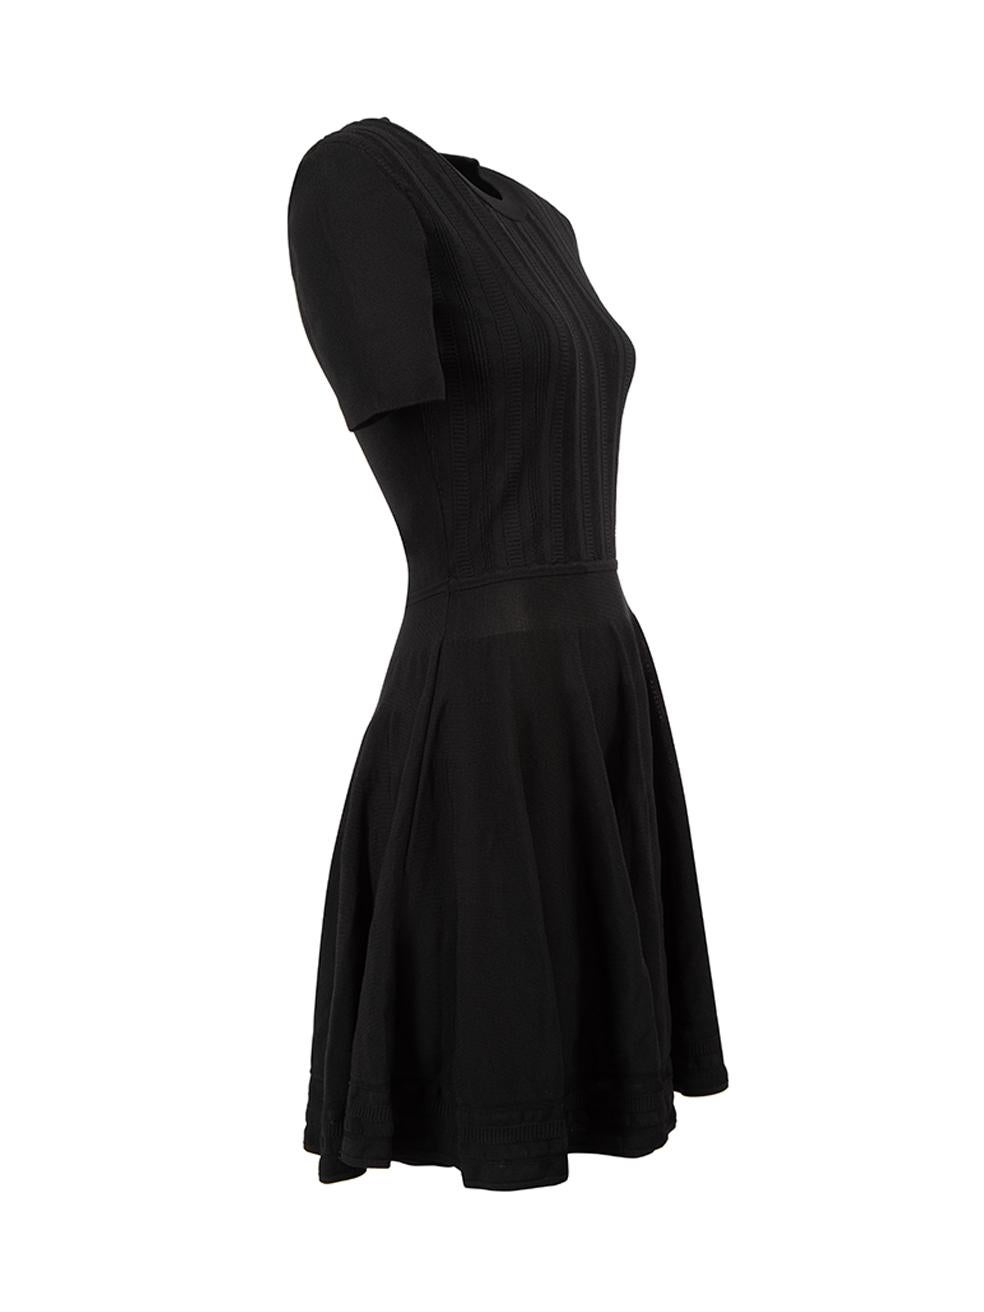 CONDITION is Very good. Hardly any visible wear to dress is evident on this used McQ designer resale item.



Details


Black

Viscose

Mini knit dress

Stretchy

Round neckline

Short sleeves





Made in China



Composition

85% Viscose and 15%